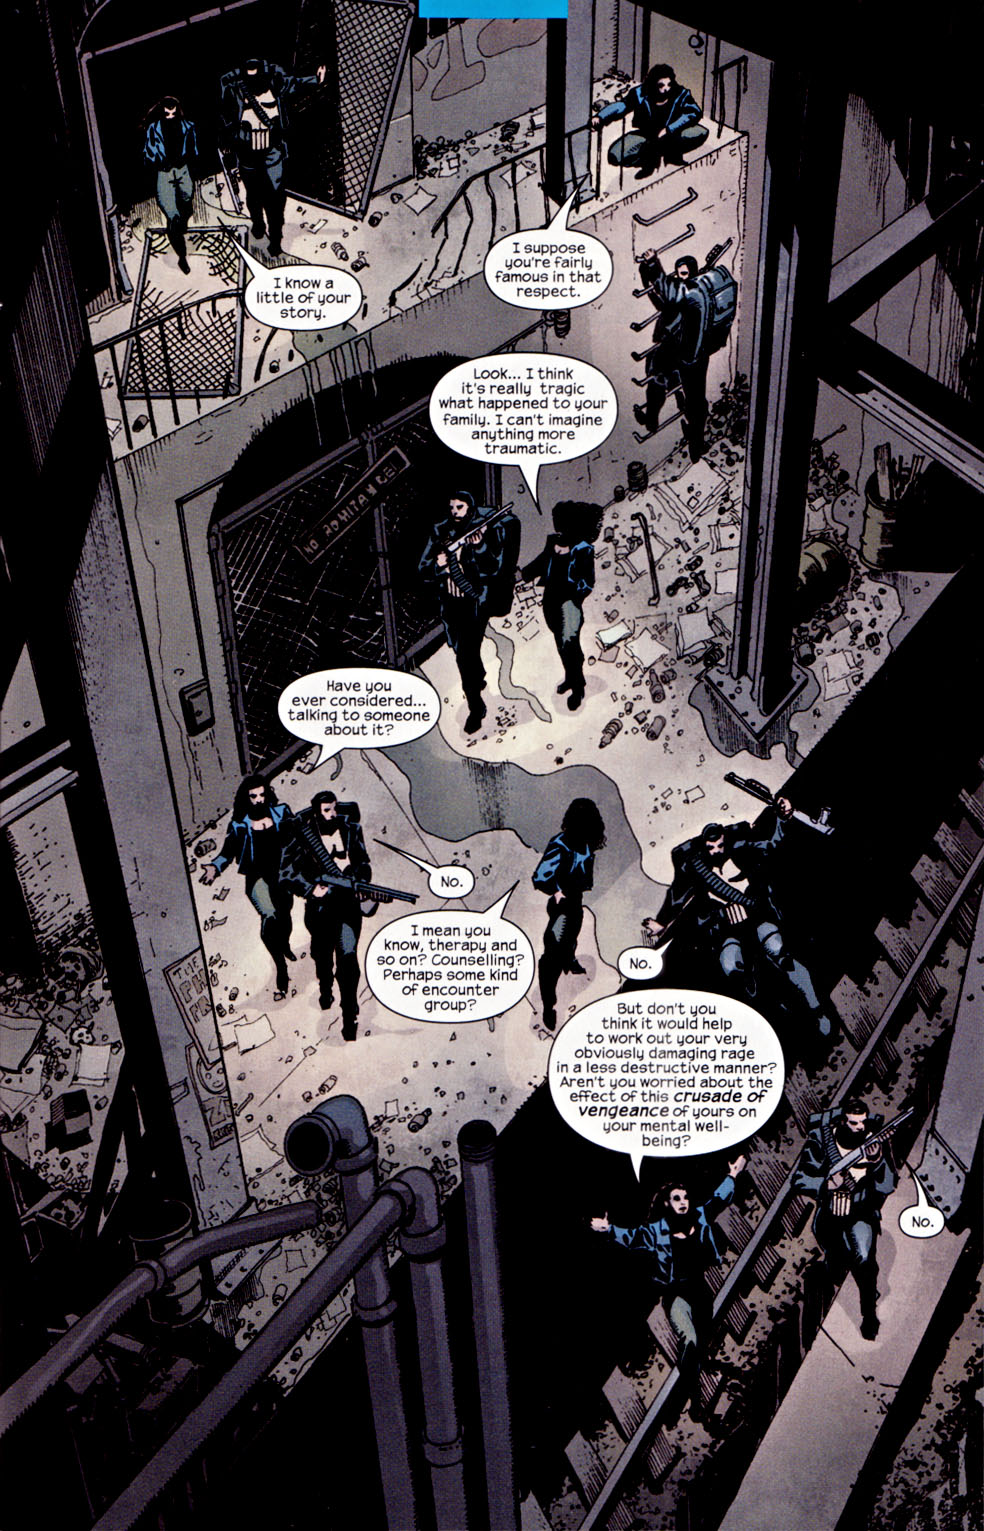 The Punisher (2001) issue 26 - Hidden #03 - Page 4